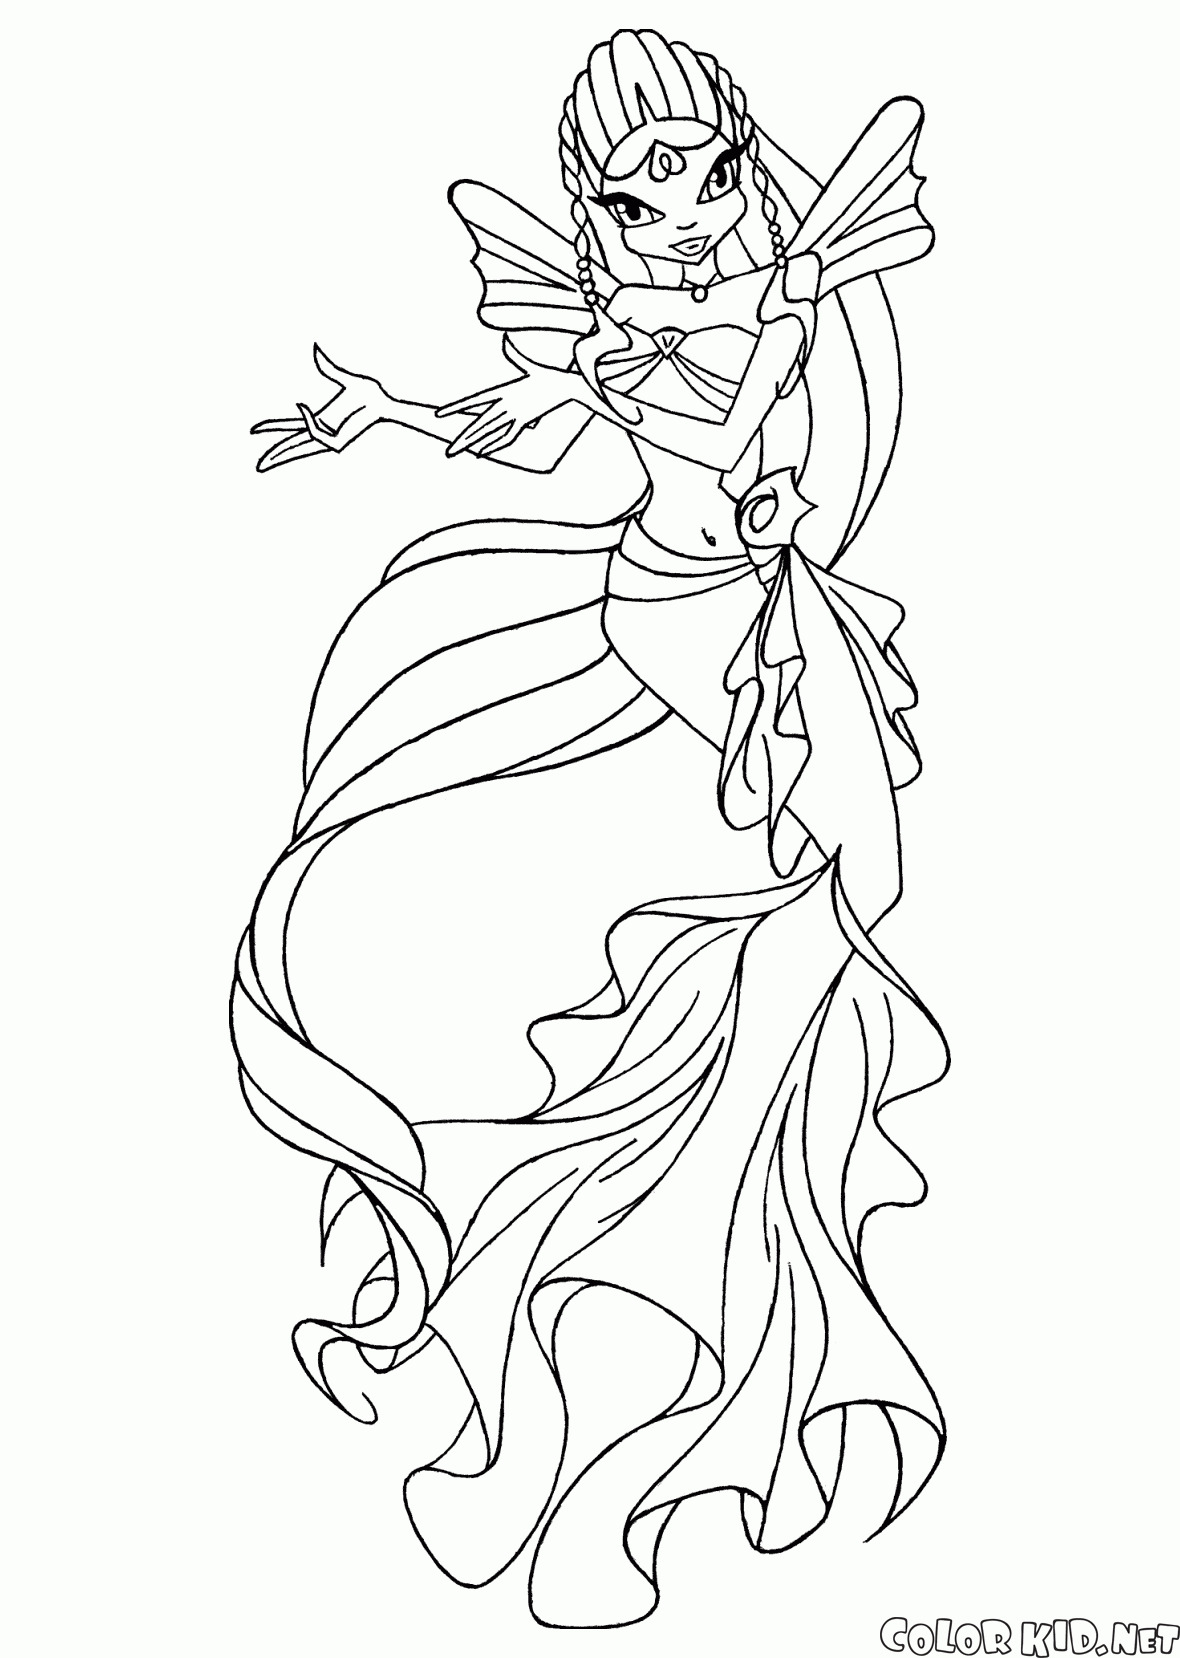 Coloring page - Mermaid and seahorse